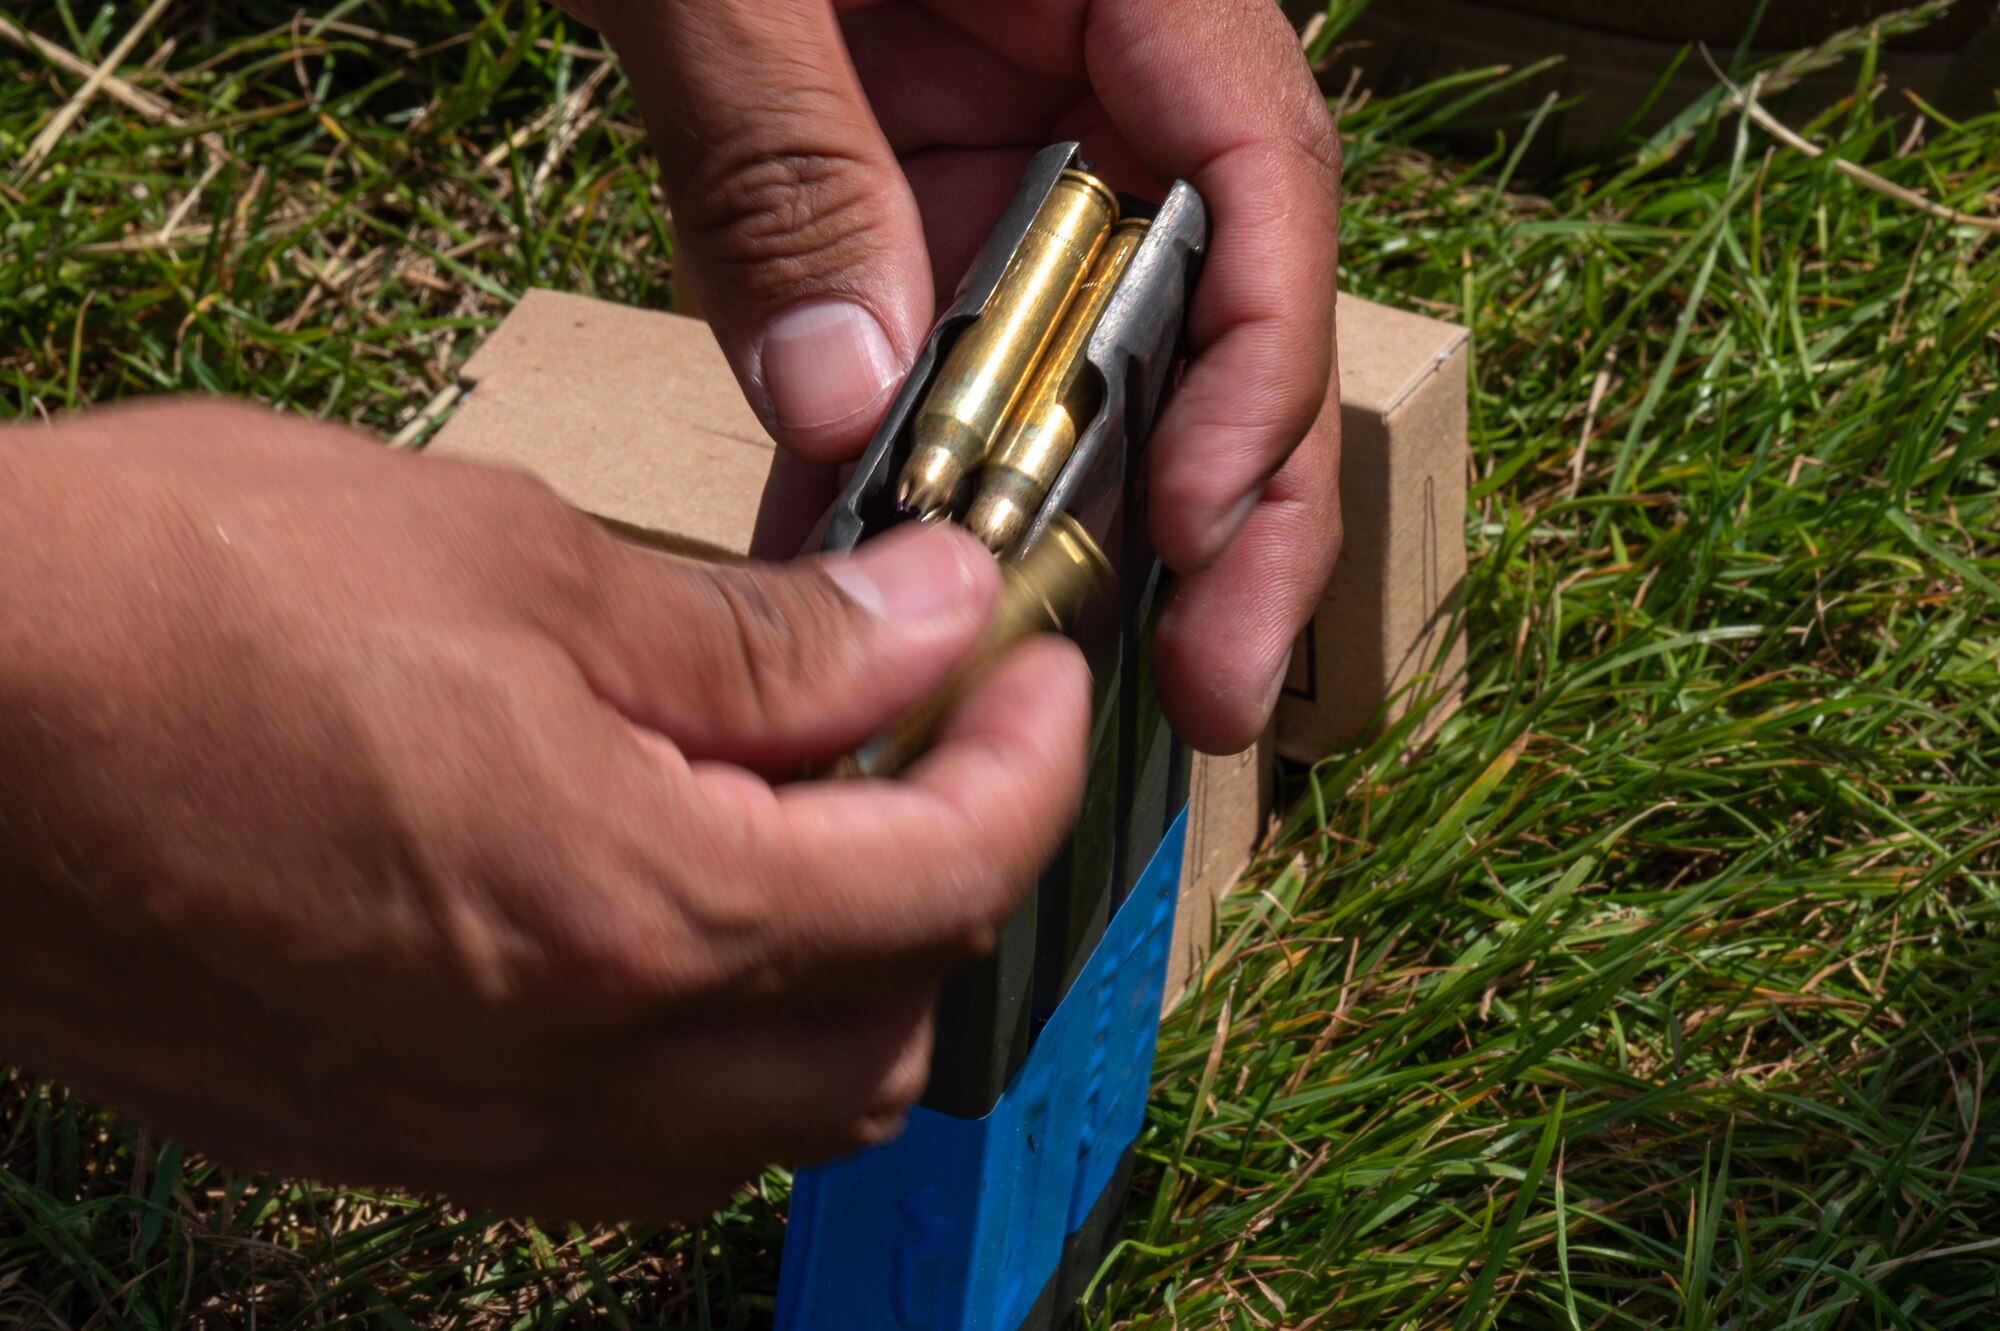 A U.S. Air Force Airman assigned to the 100th Security Forces Squadron, loads blank ammunition into a magazine during a training exercise at Royal Air Force Mildenhall, England, June 21, 2023.